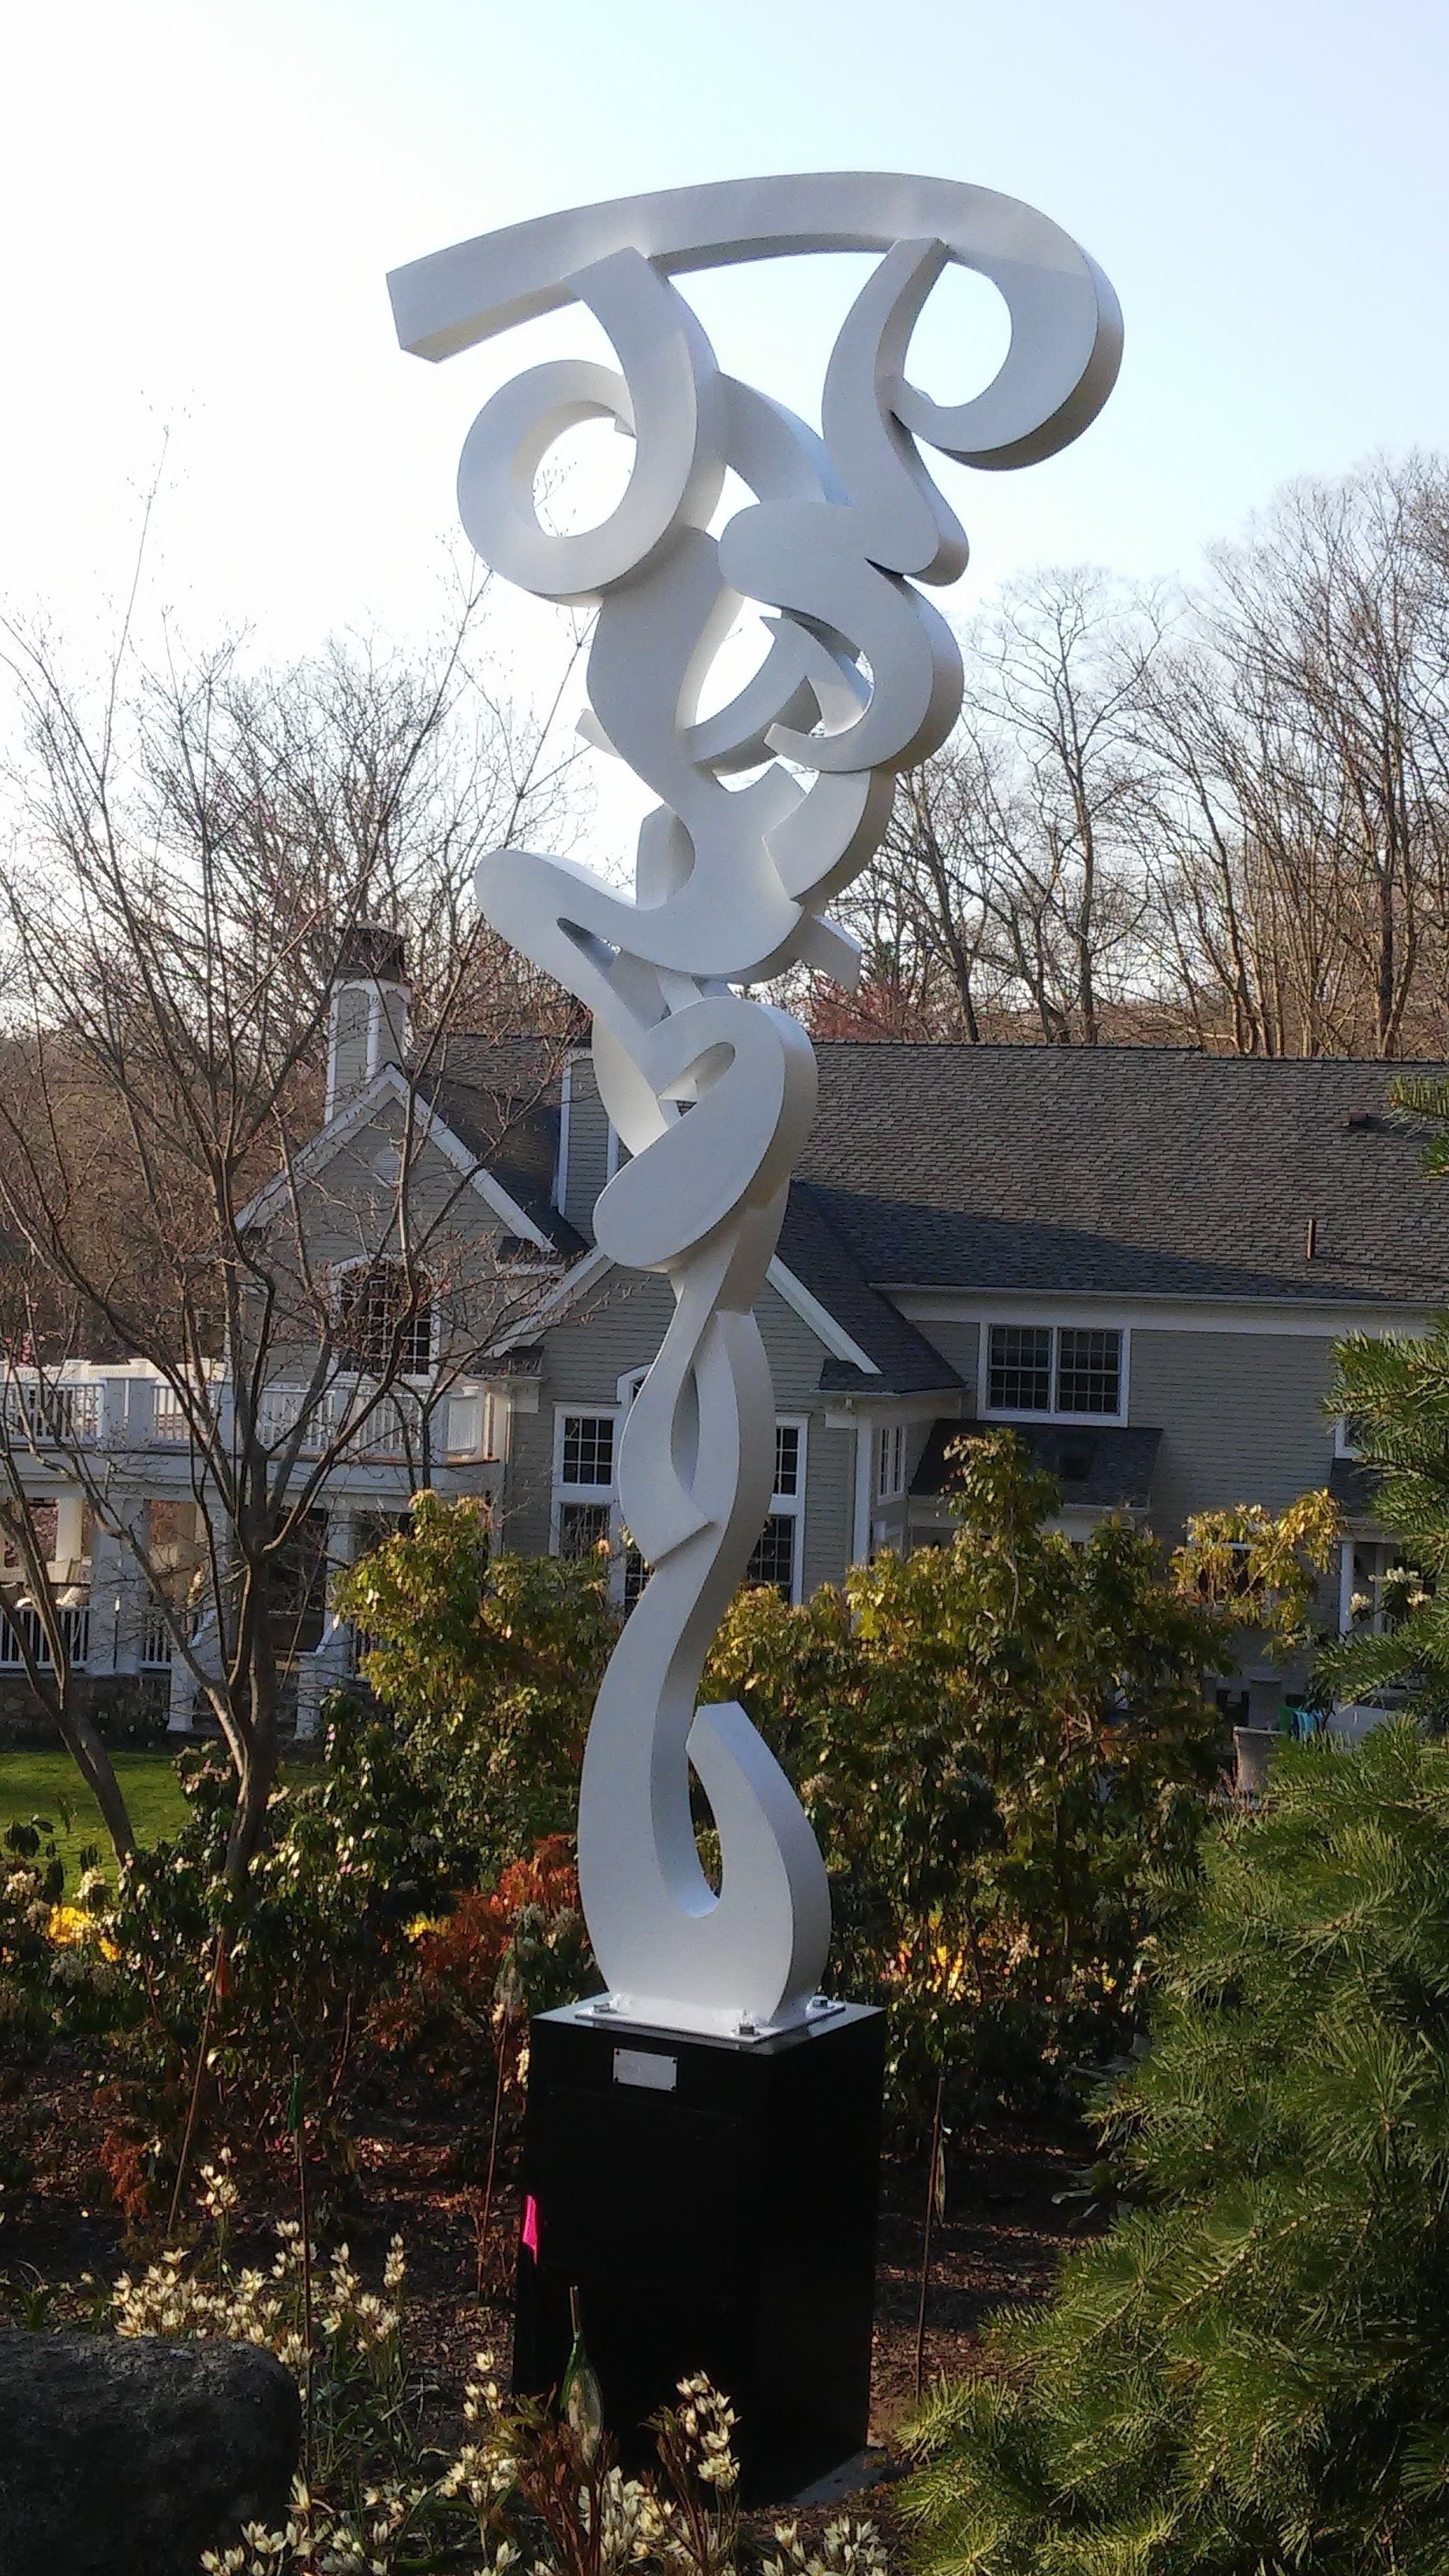 Paul Machalaba; Sonic Fusion II Commission, 2018, Original Sculpture Aluminum, 5 x 14 feet. Artwork description: 241 Large 14 foot ultra fluid complex abstract sculpture commission with cast metal look.  Due to the fact that every sculpture is one of a kind, II commission can be built in a similar but slightly changed way according to the customers wishes. ...